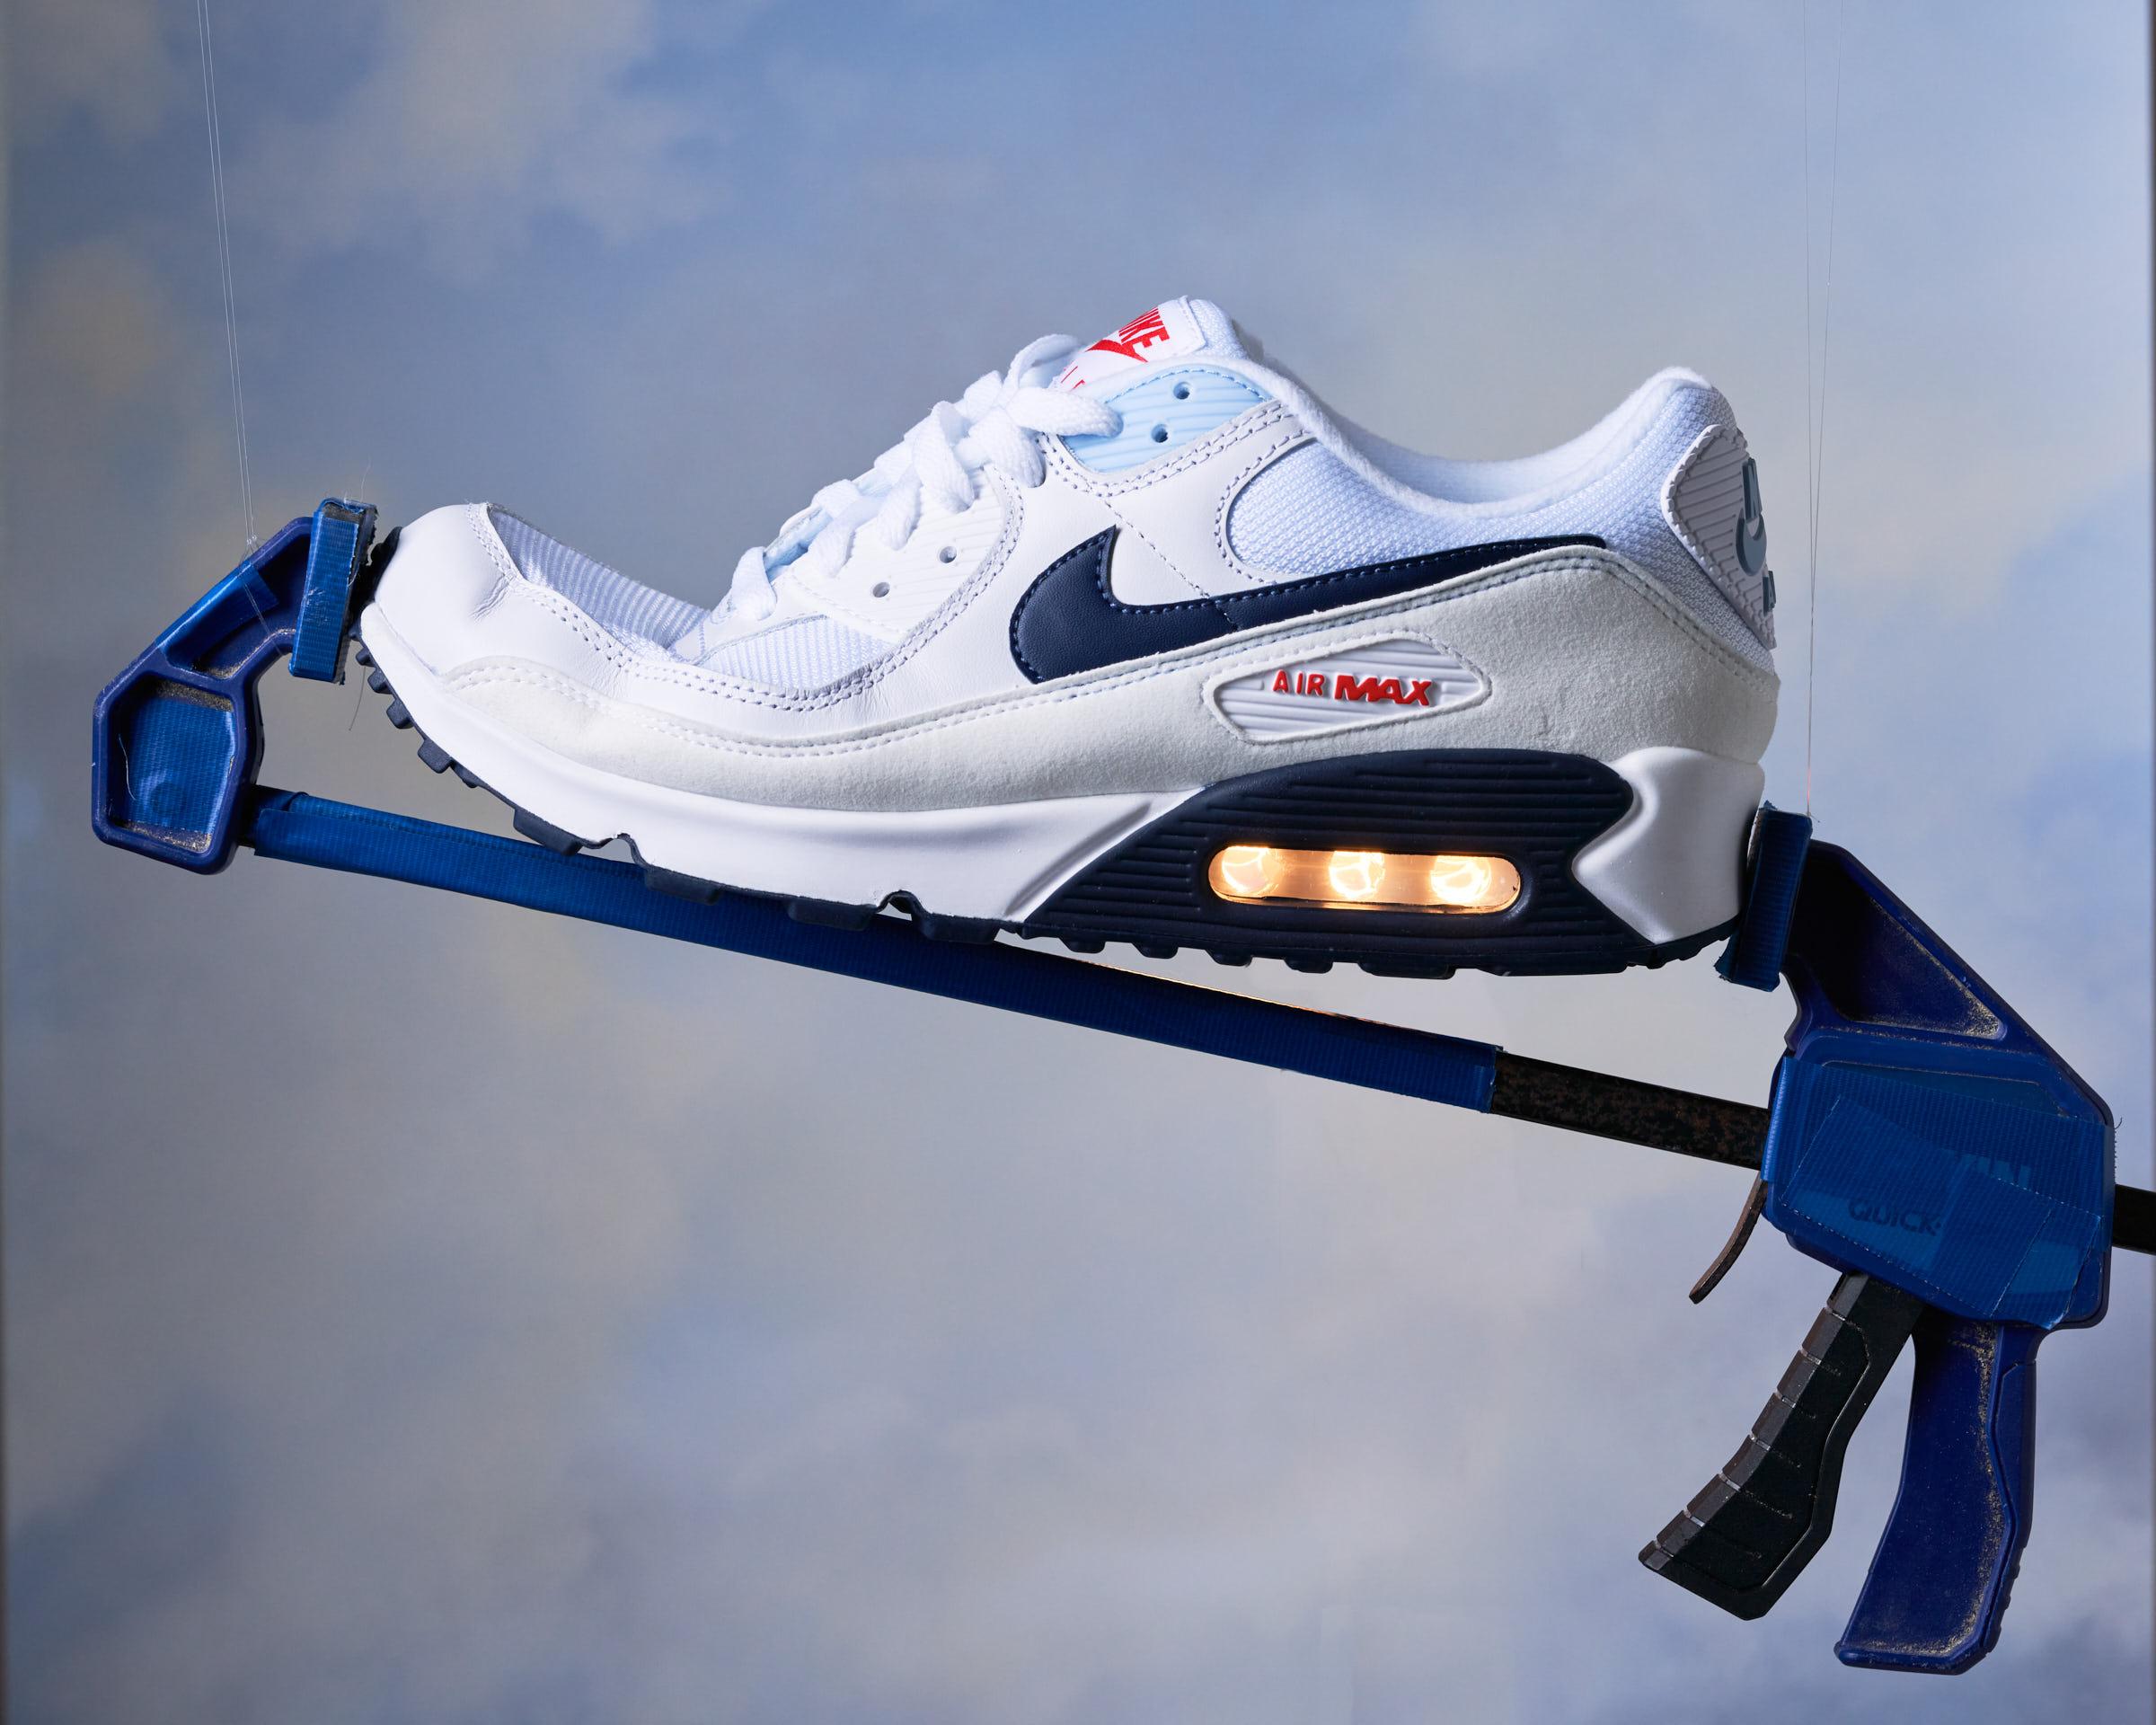 Nike Air Max 90 Review, Facts, Comparison | RunRepeat